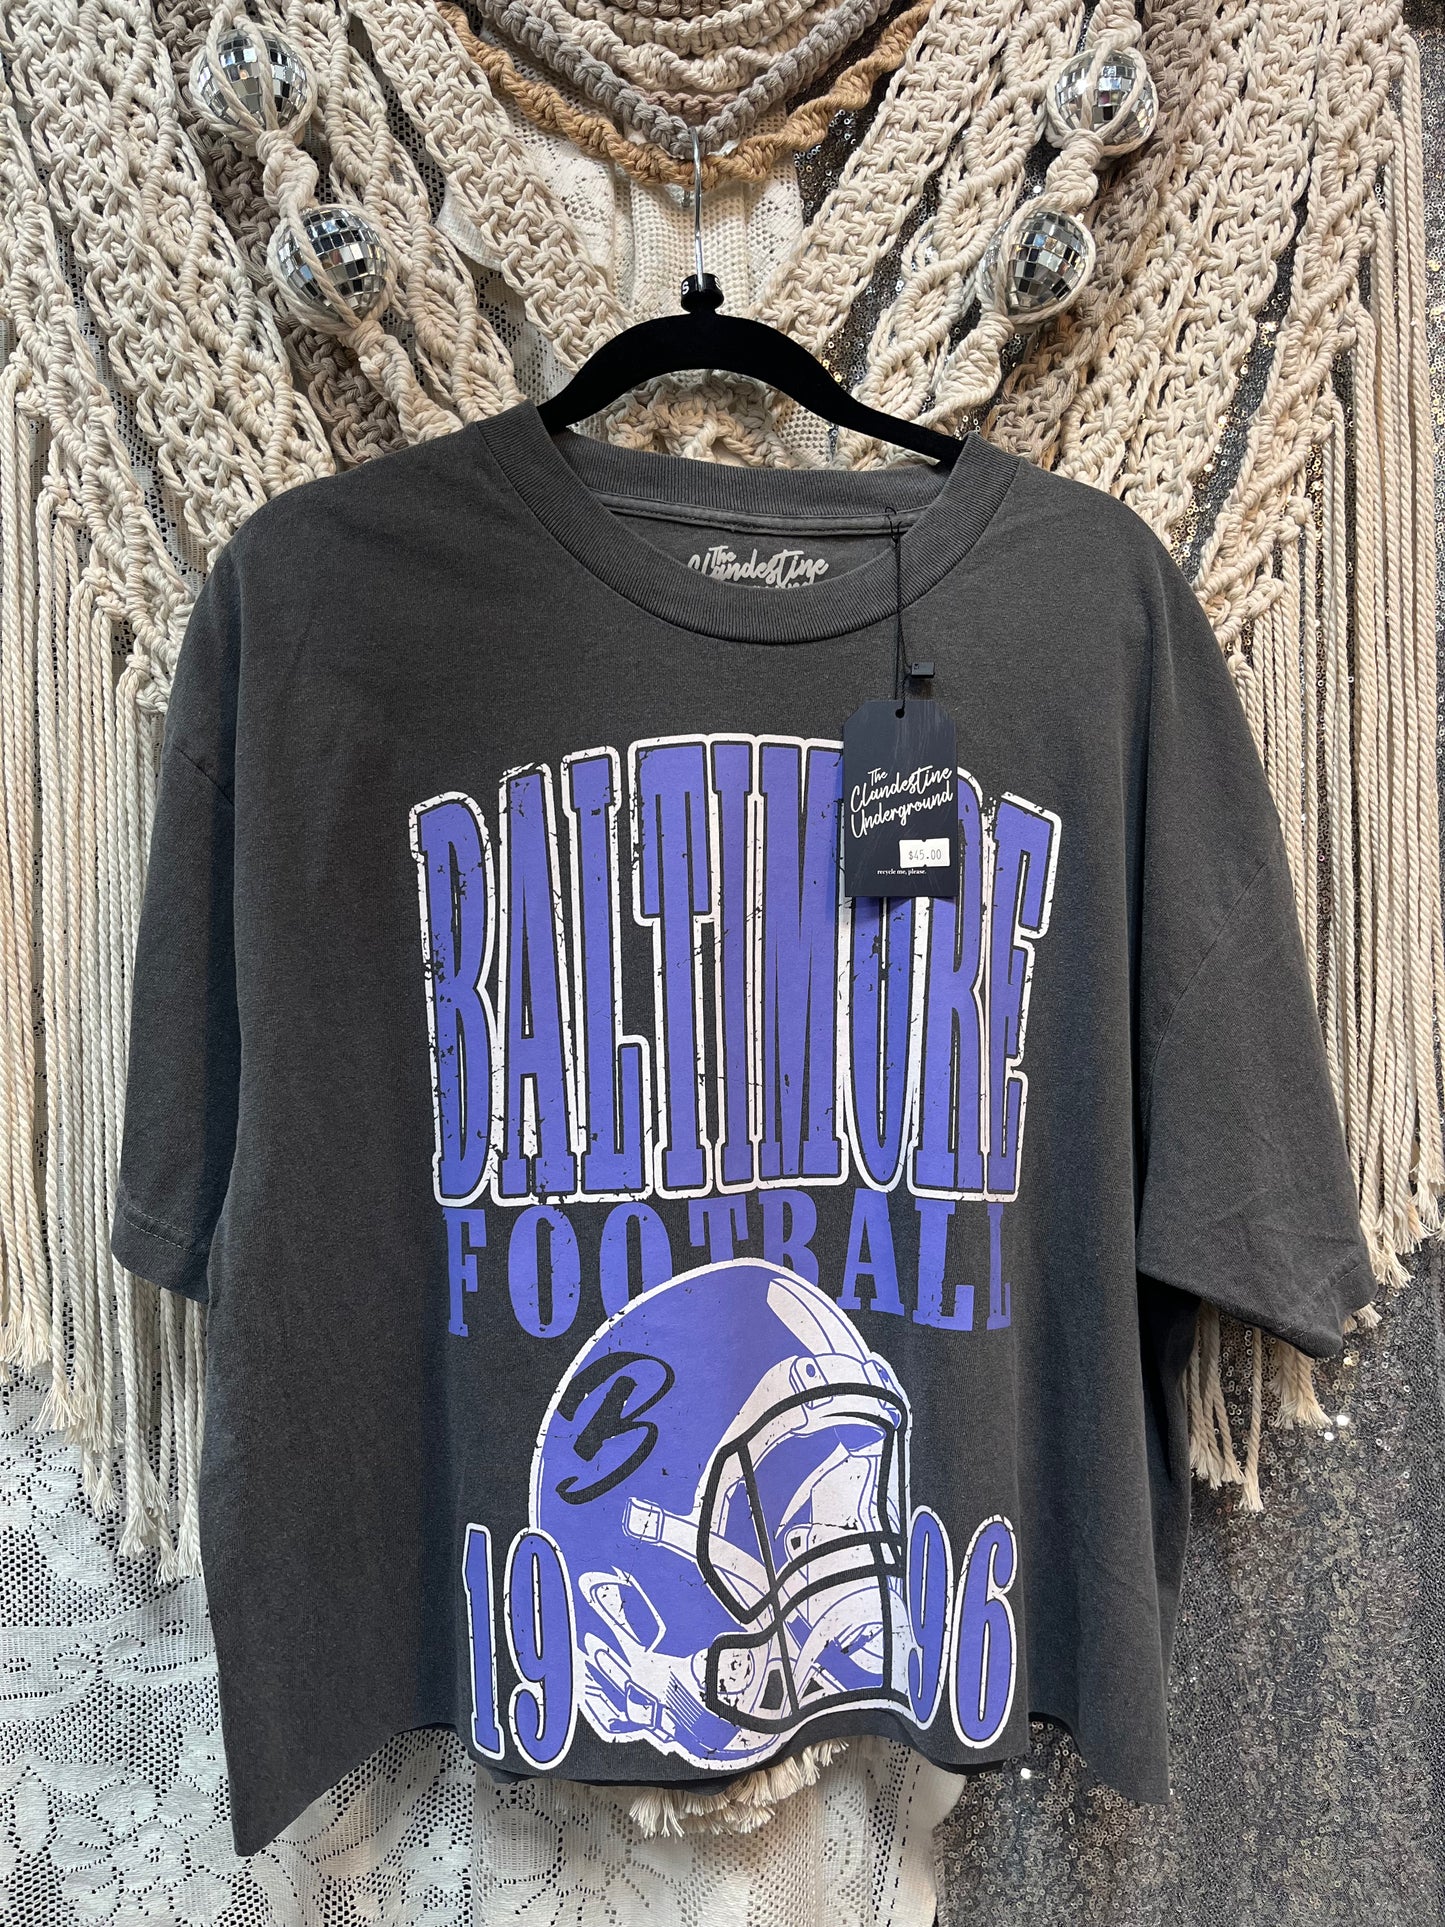 90's Vintage Baltimore Football Cropped Tee